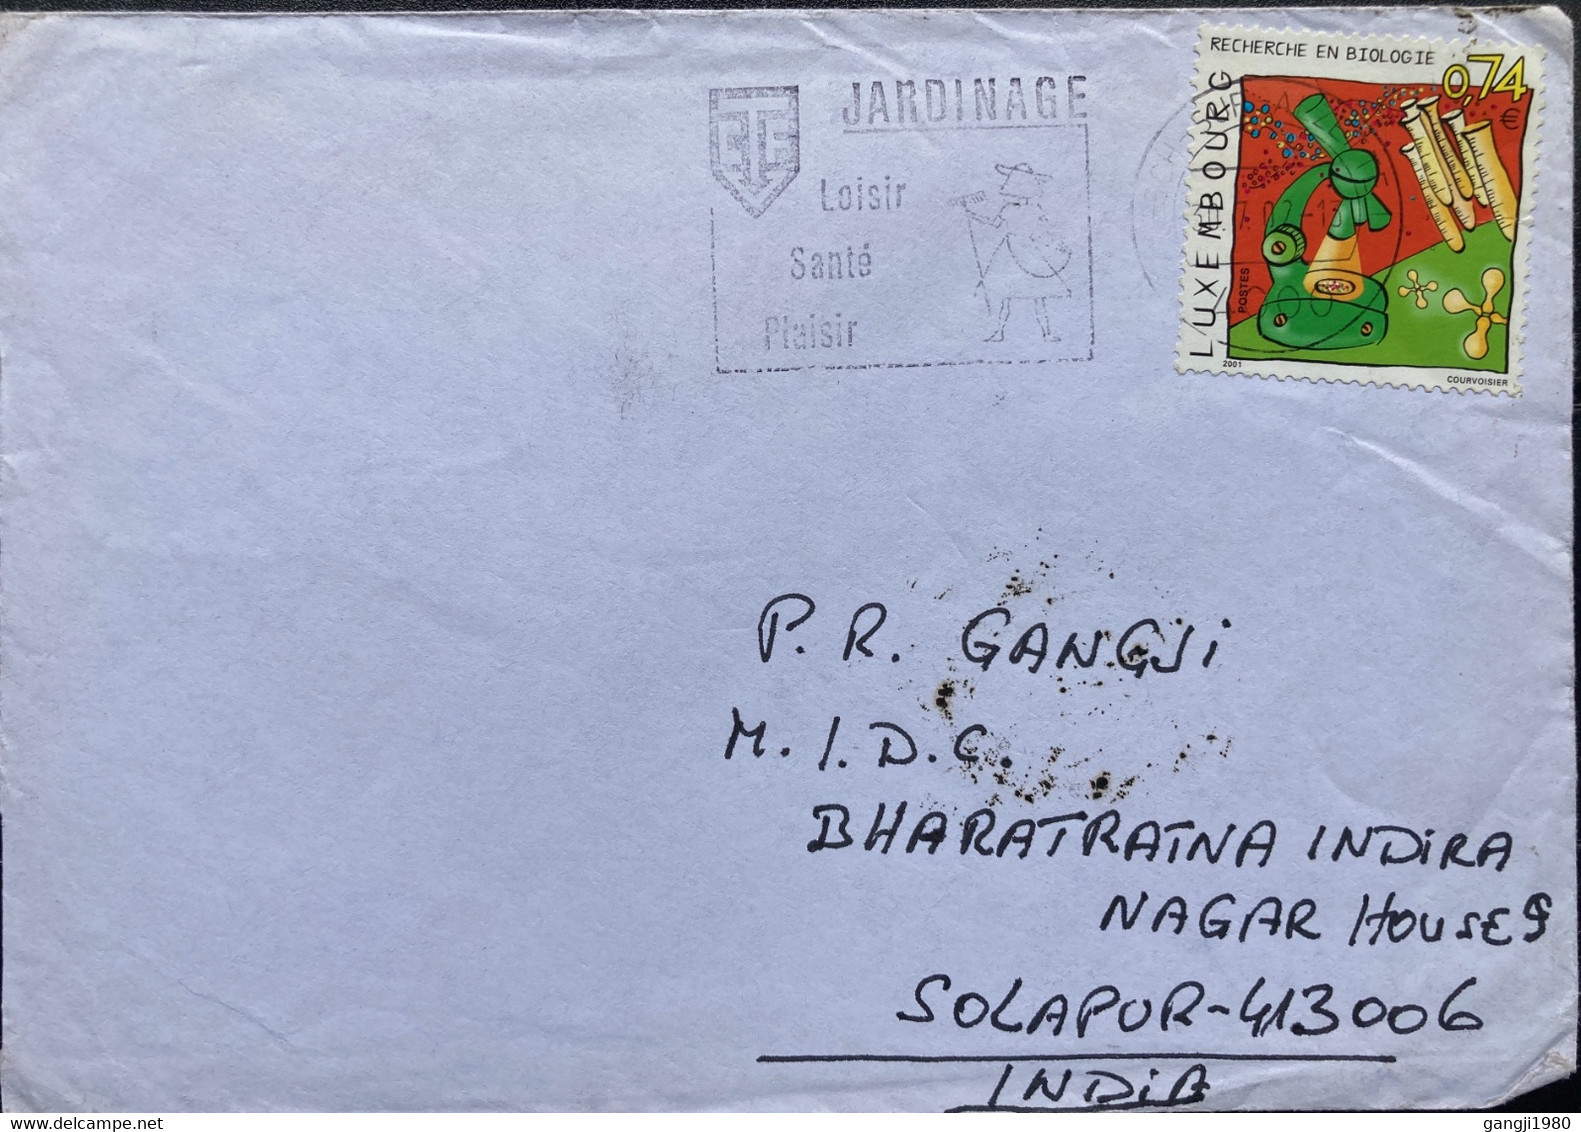 LUXEMBOURG 2002, REASERCH ,MICROSCOPE, LABROTARY ,JARDINAGE LOISIR SANTE PLAISIR ,GARDENING FOR HEALTH, COVER TO INDIA - Lettres & Documents